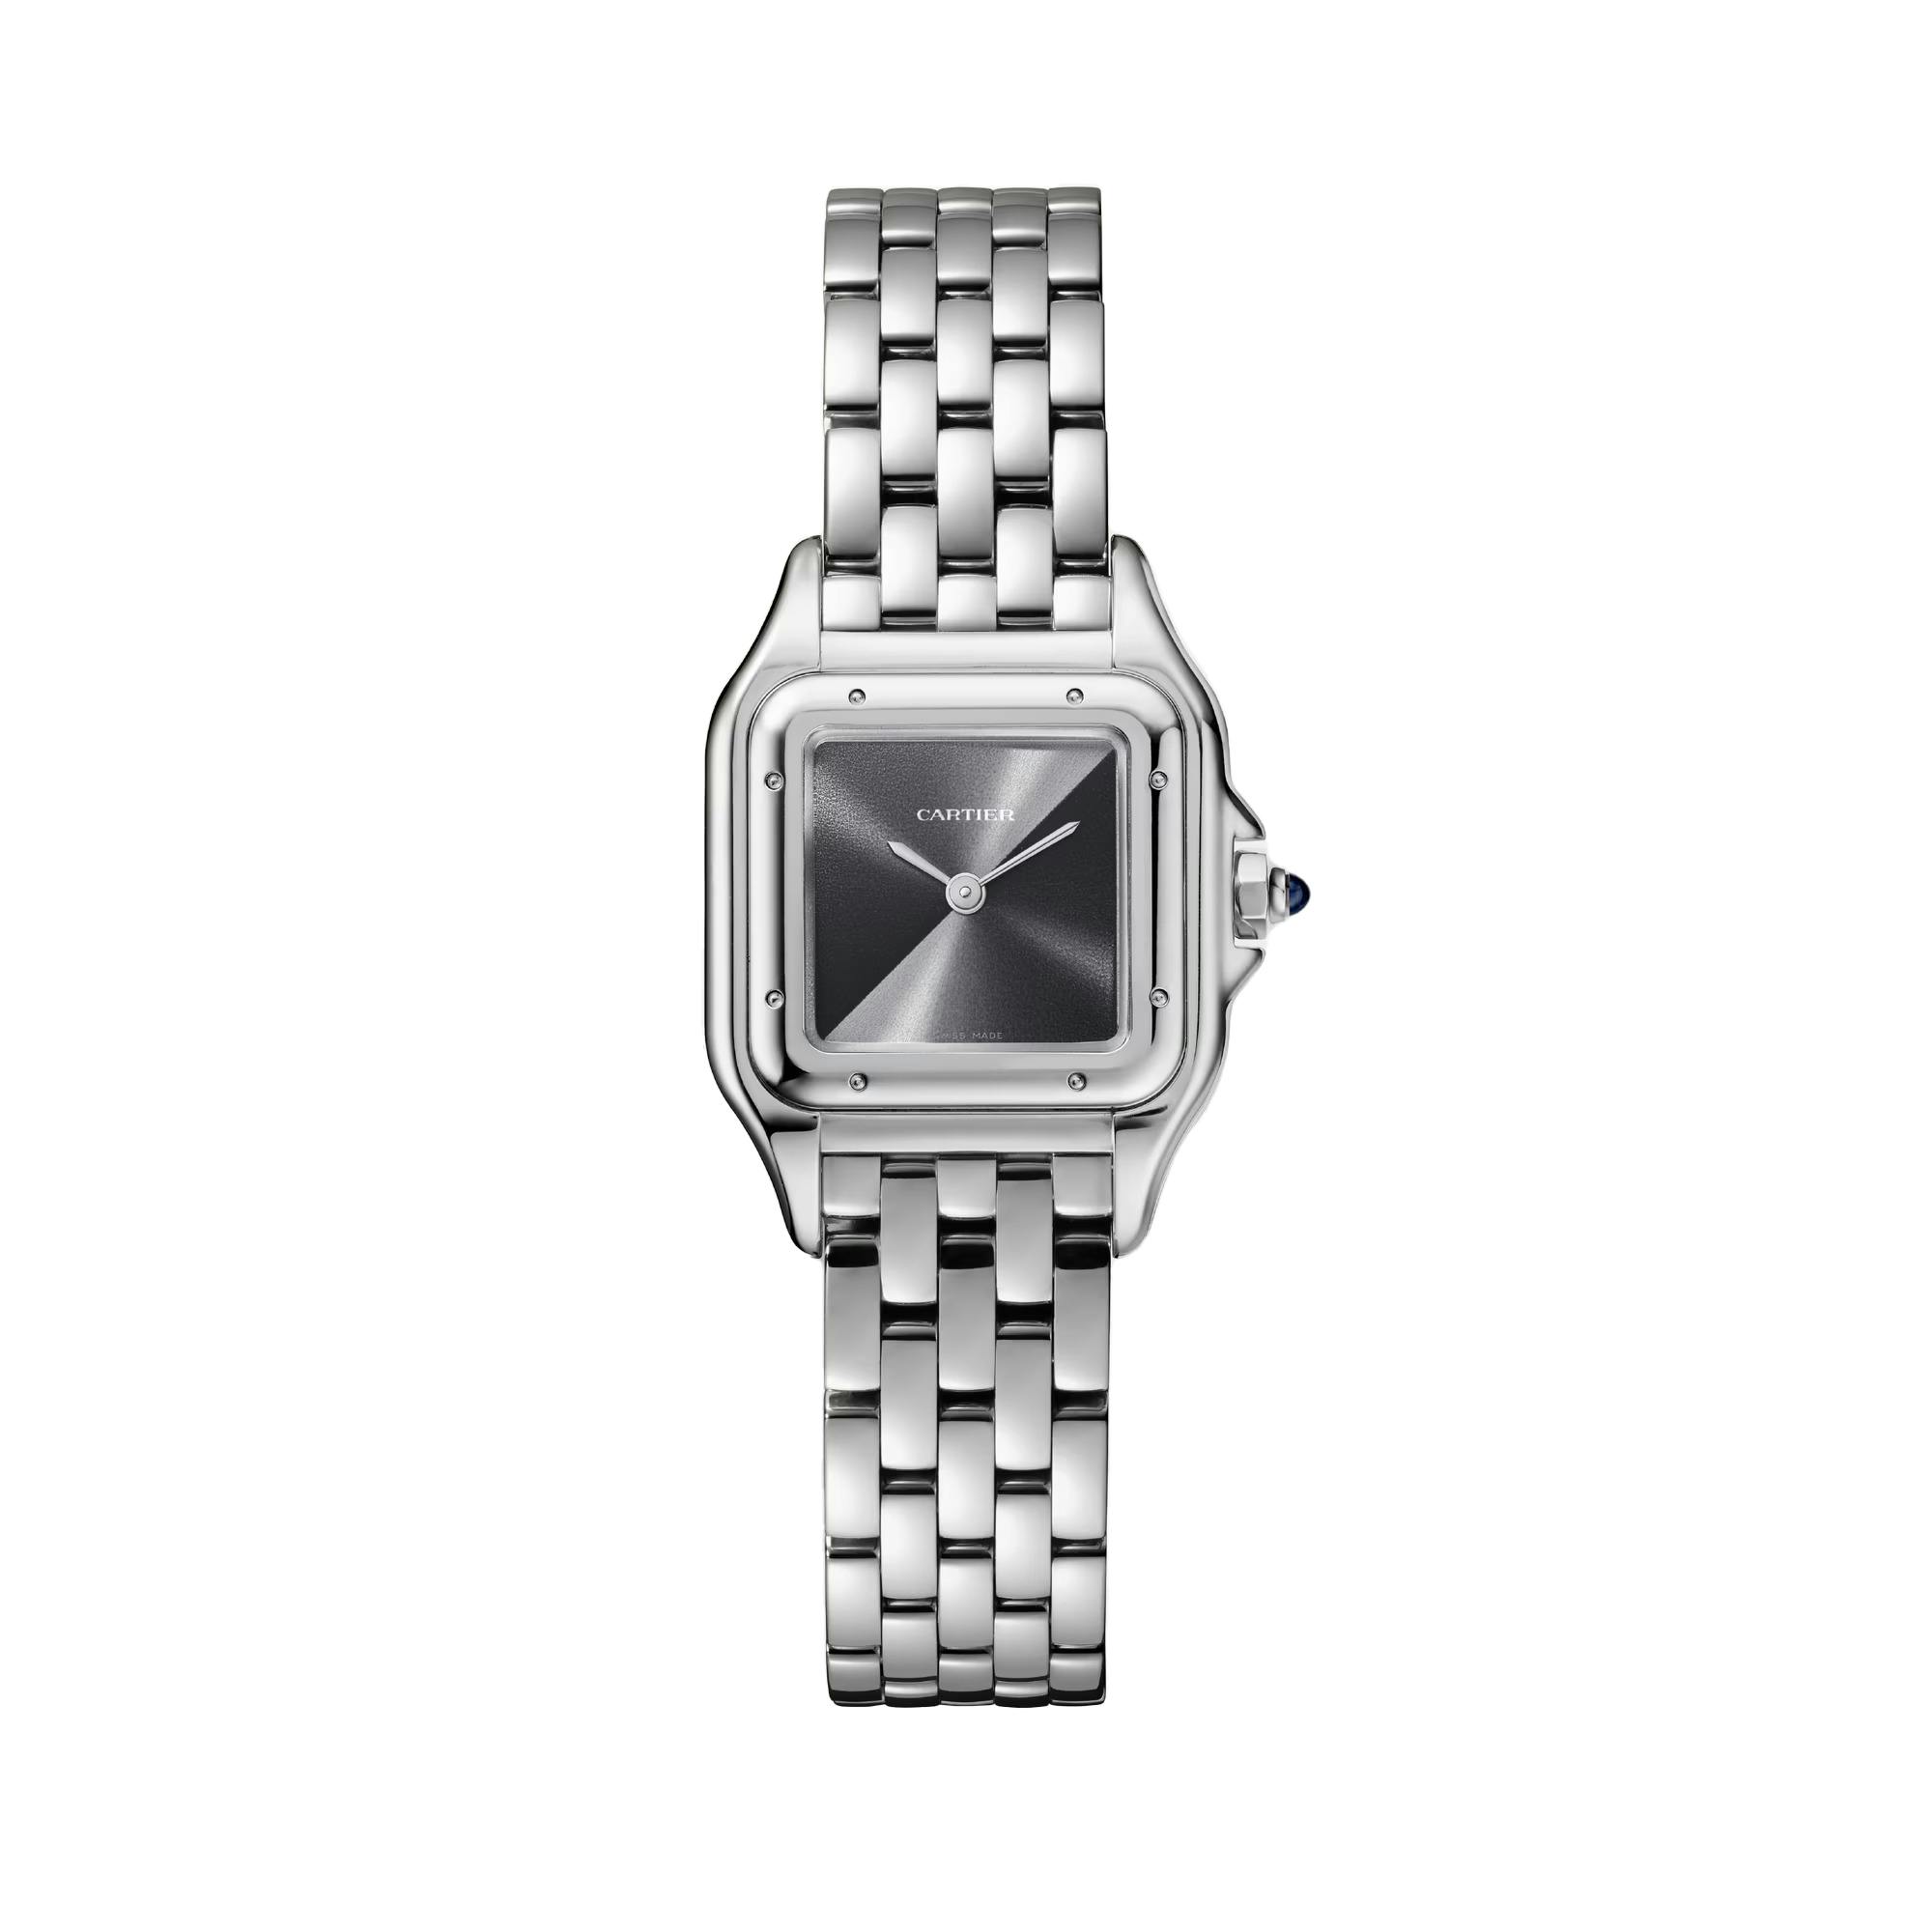 Panthere de Cartier Watch with Gray Dial, small  model 